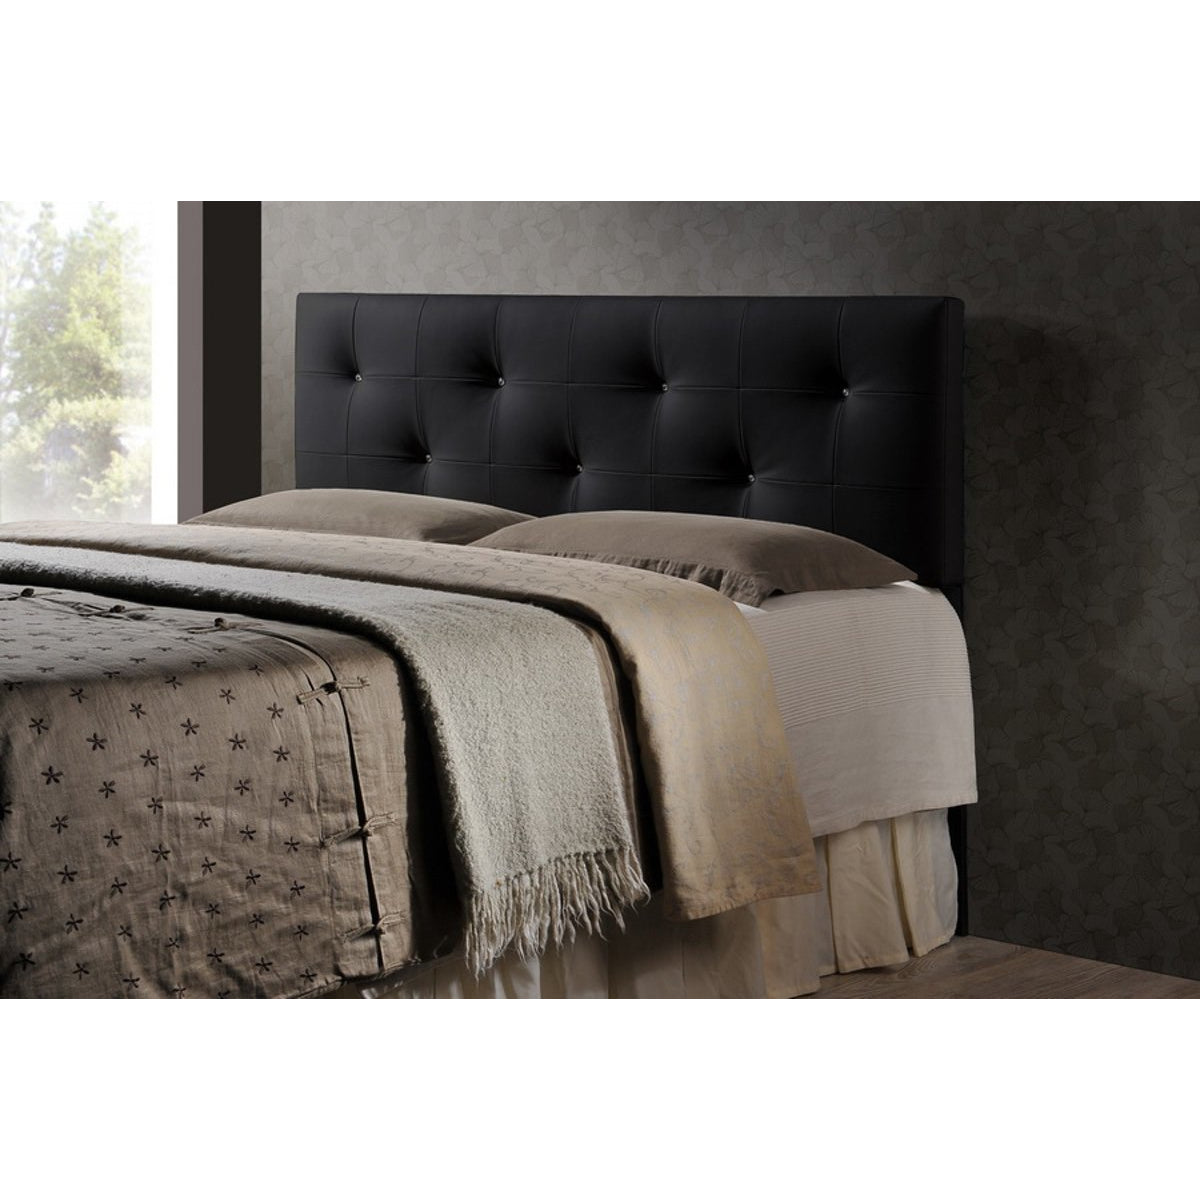 Baxton Studio Dalini Modern and Contemporary Queen Black Faux Leather Headboard with Faux Crystal Buttons Baxton Studio-Headboards-Minimal And Modern - 1